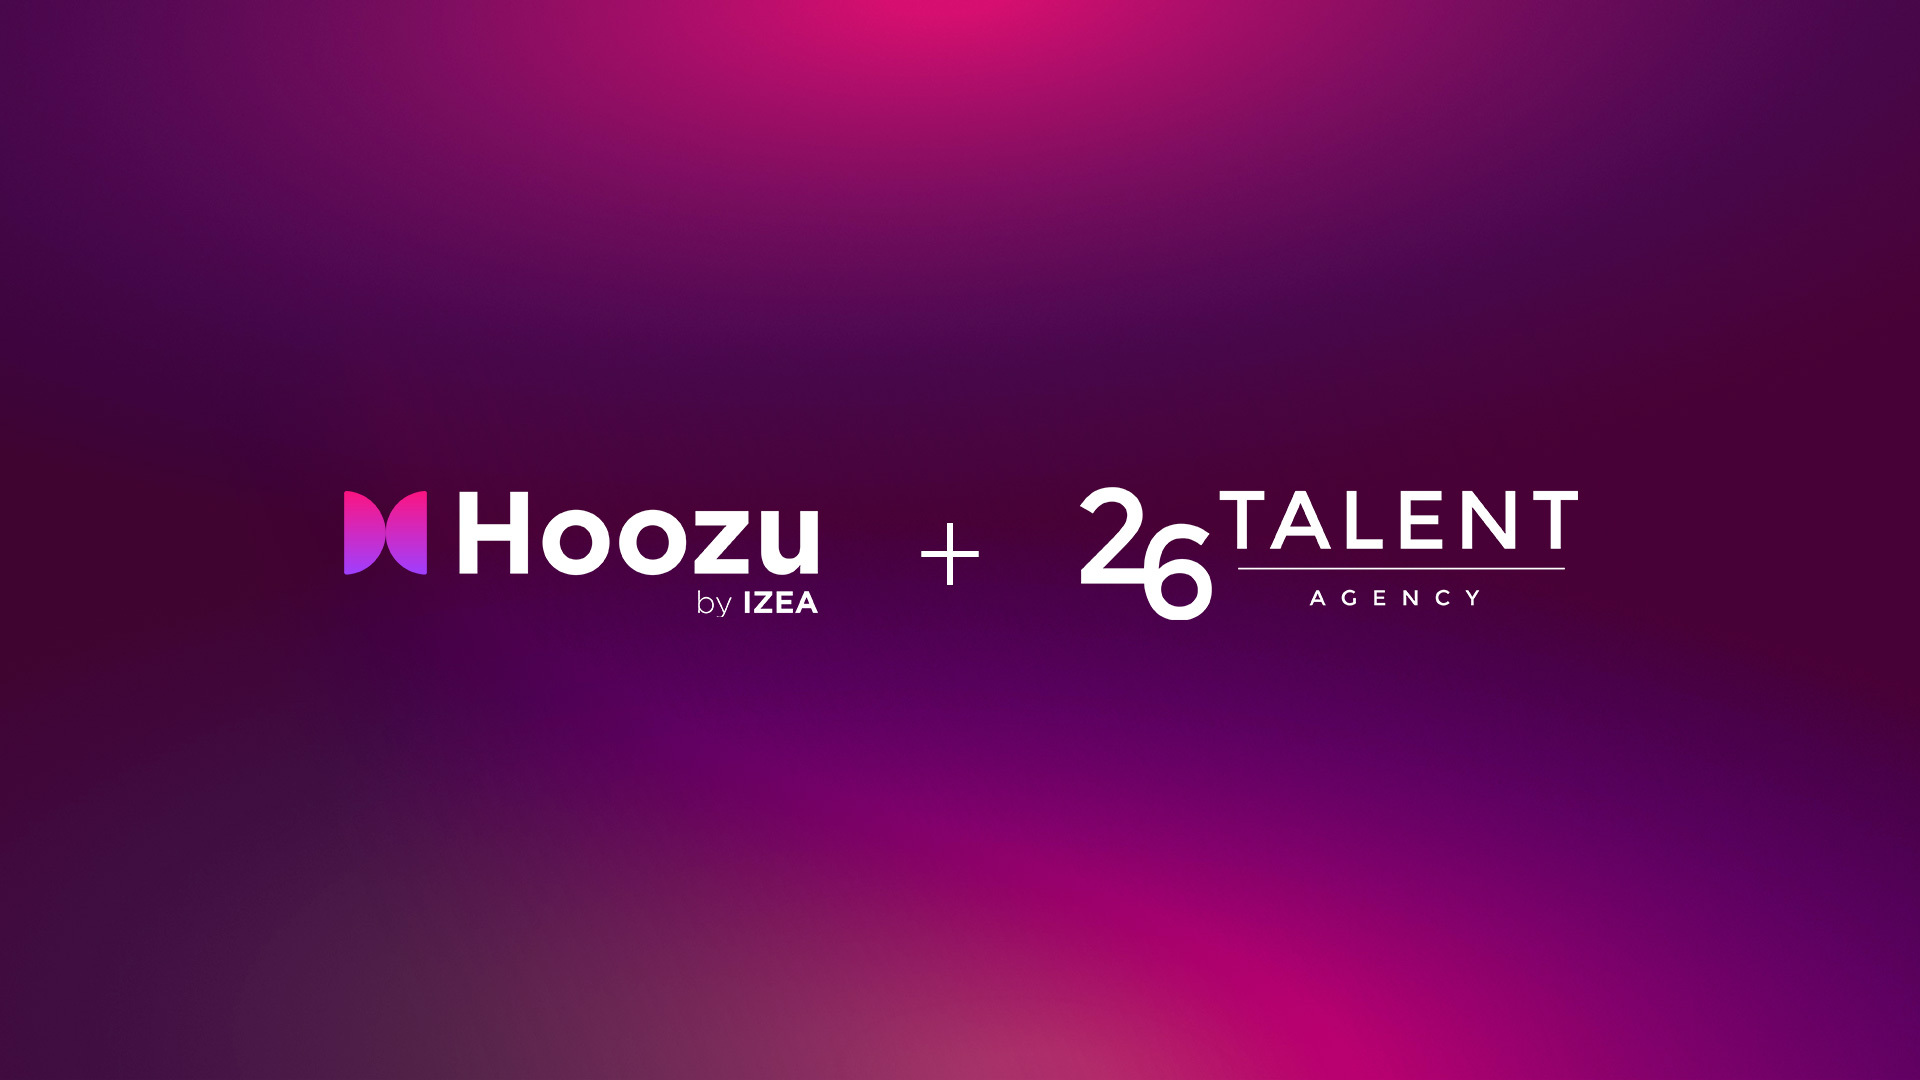 IZEA’s Hoozu Acquires 26 Talent, Amplifying Influencer Marketing Reach in APAC